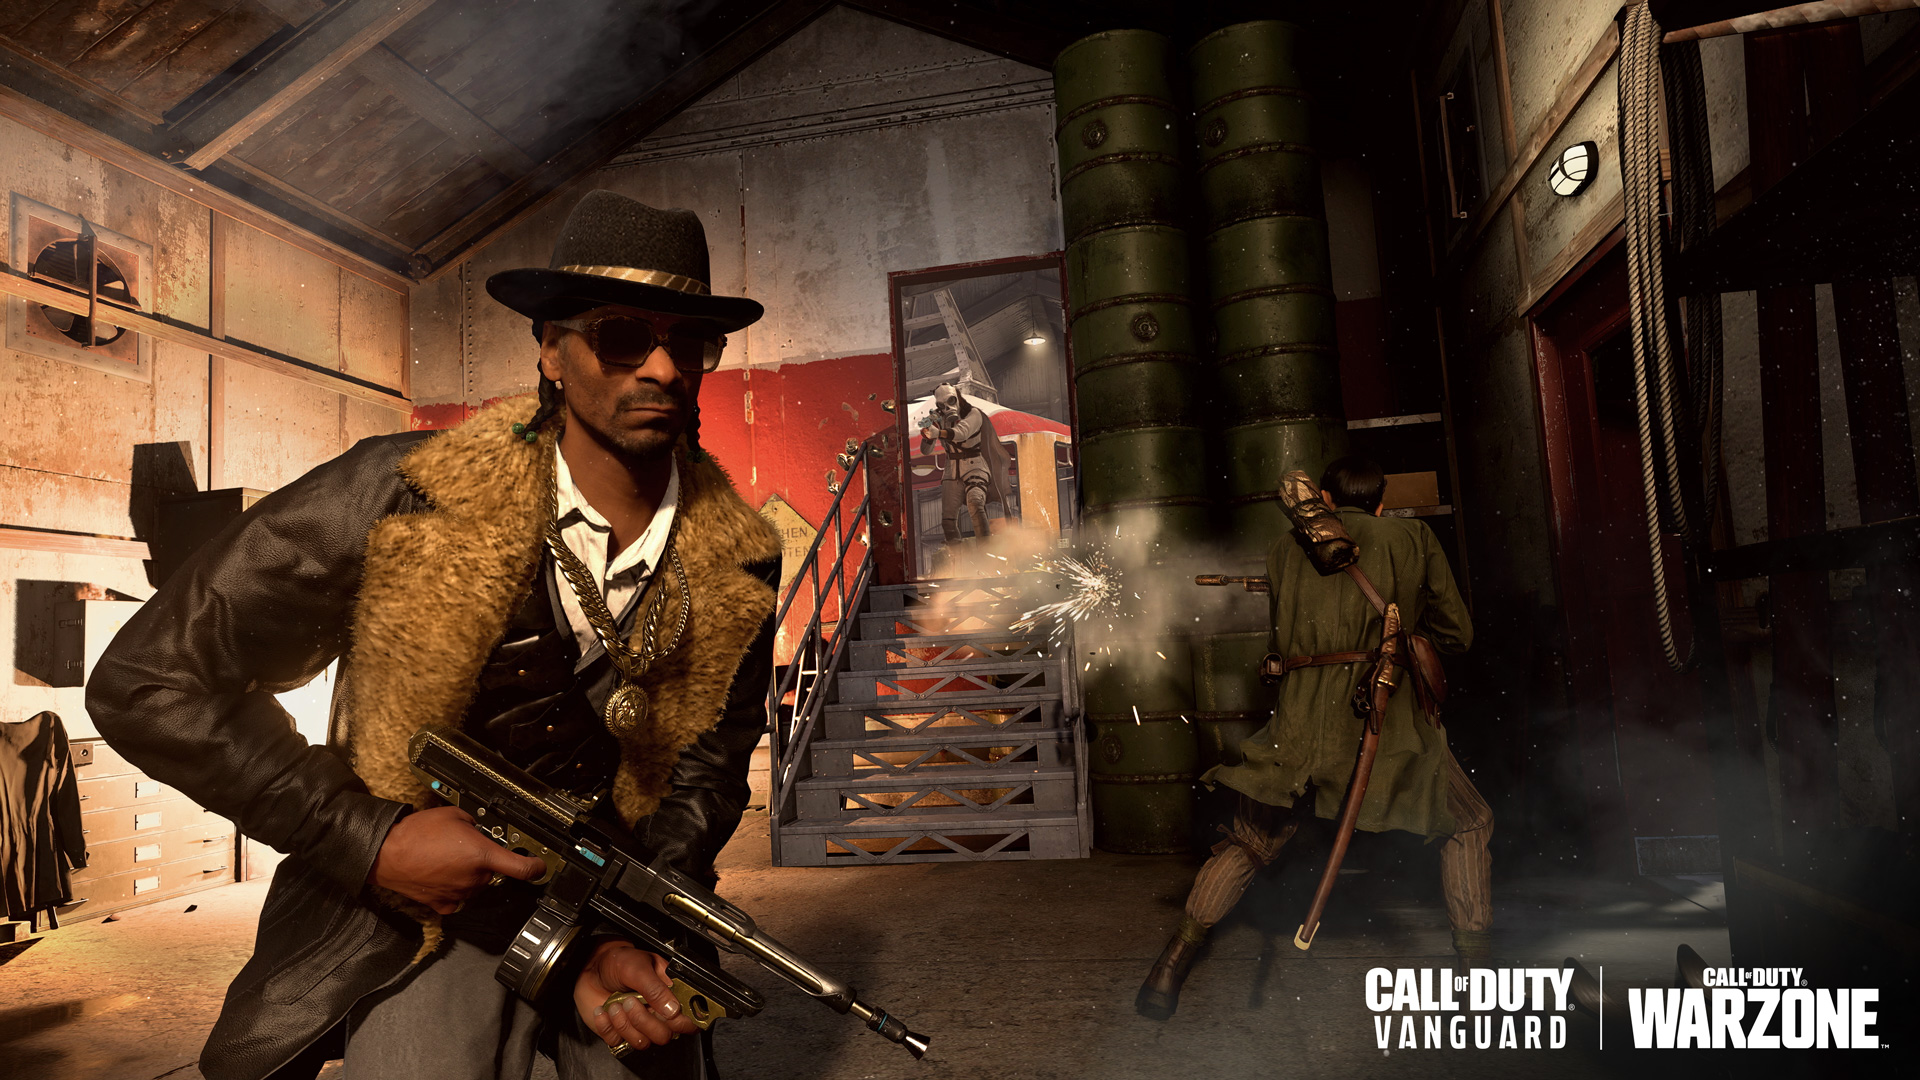 Snoop Dogg to be Playable Operator in Call of Duty screenshot 2